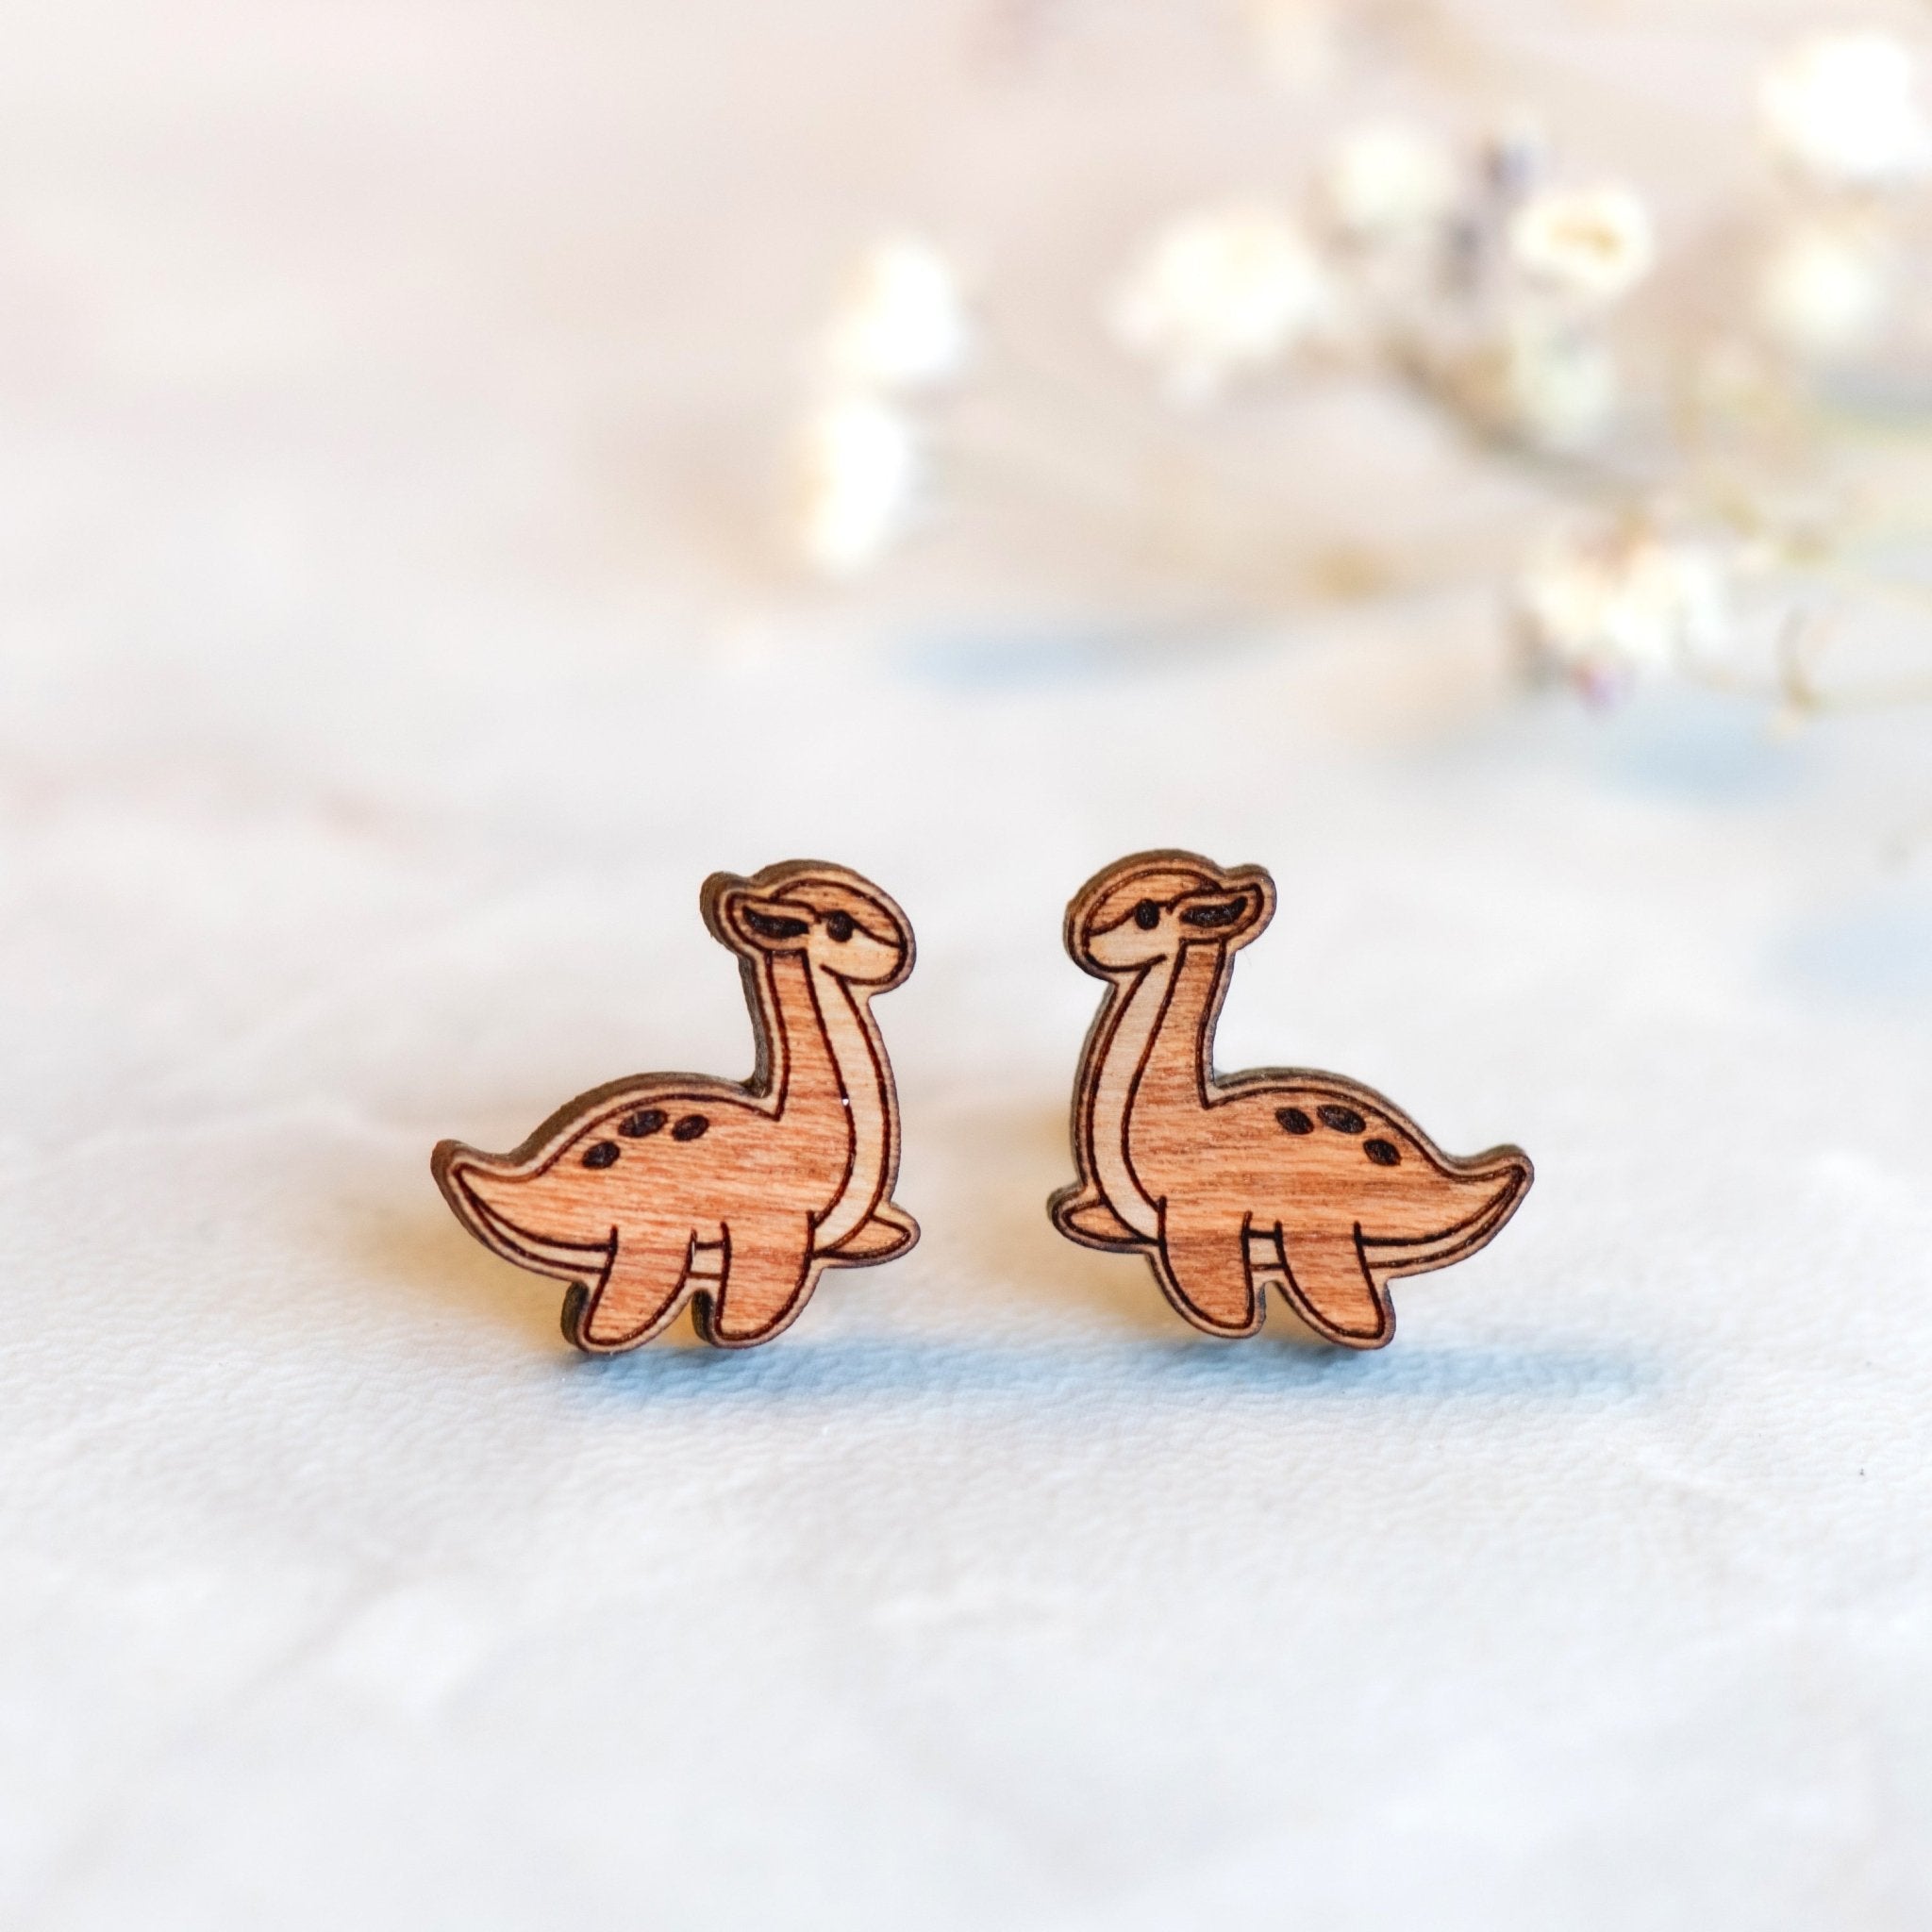 Cute Loch Ness Monster Cherry Wood Stud Earrings - ES13050 - Robin Valley Official Store